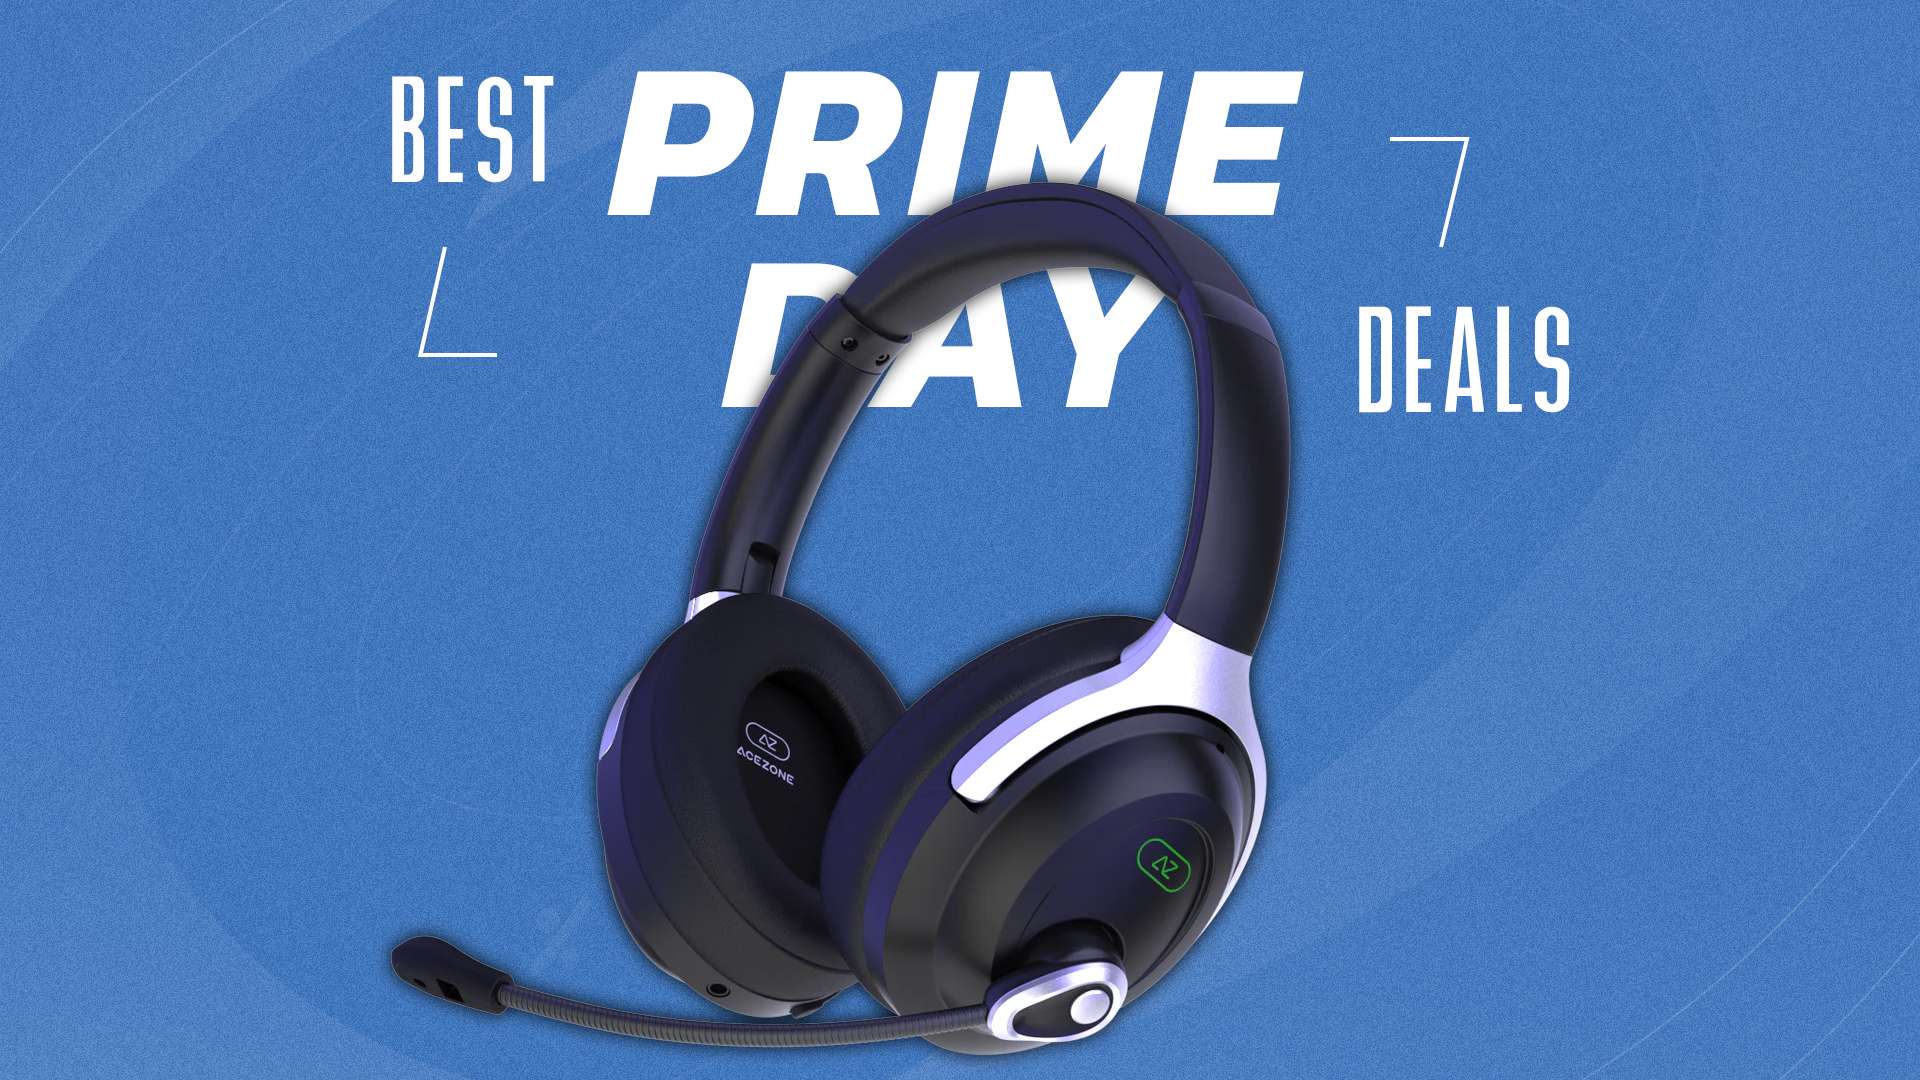 prime day deal on the acezone headset with it square in the middle of the image